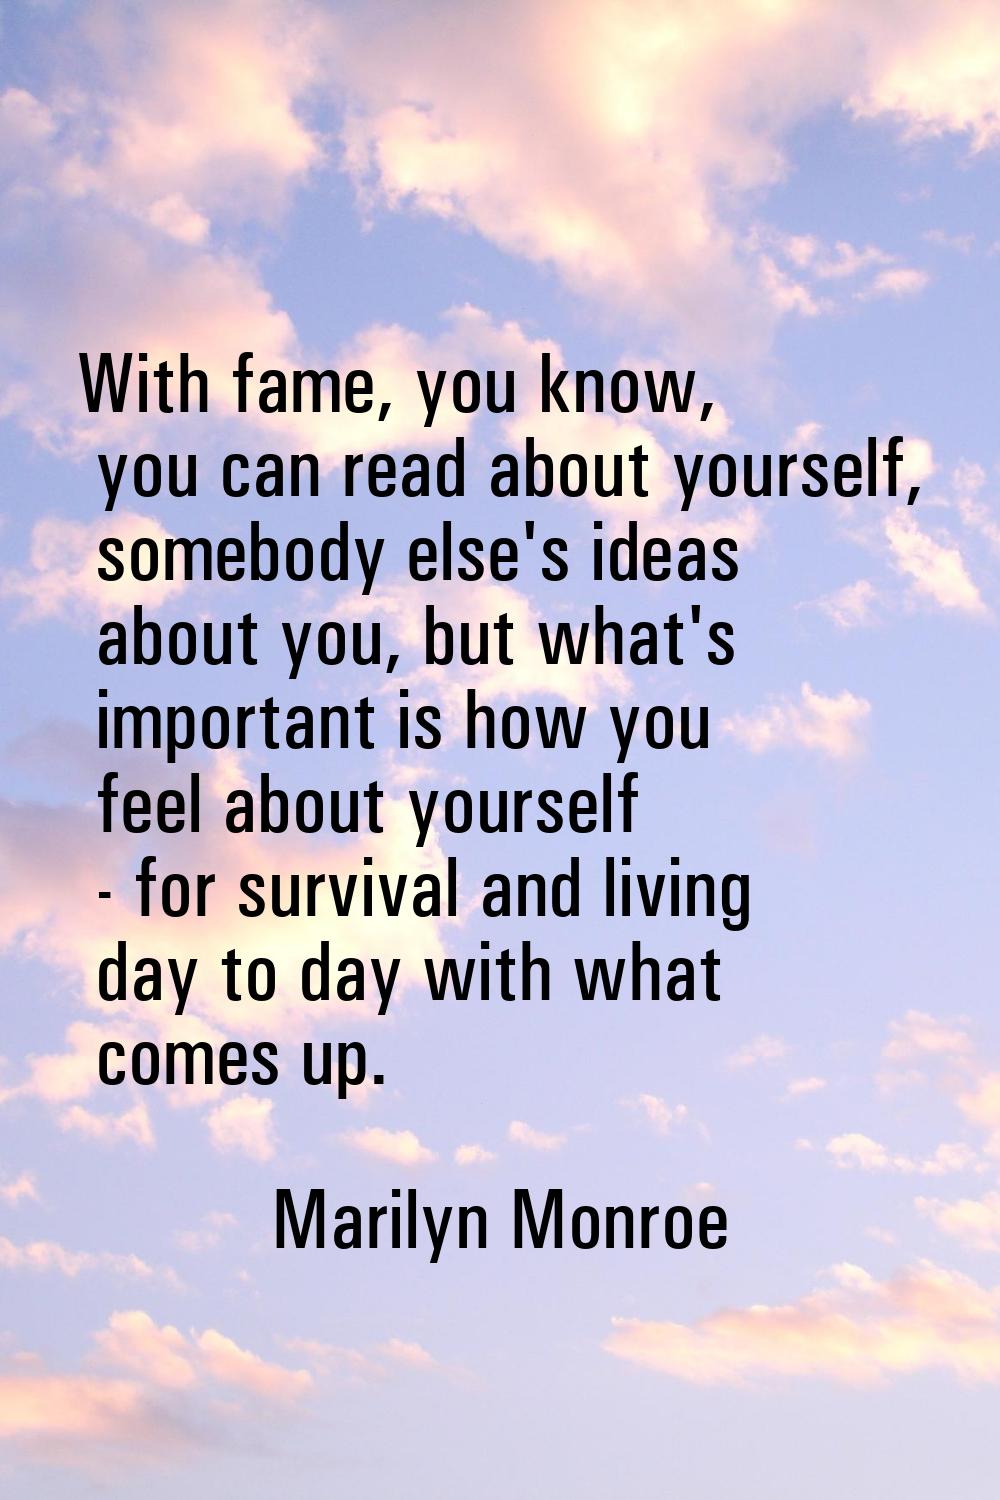 With fame, you know, you can read about yourself, somebody else's ideas about you, but what's impor